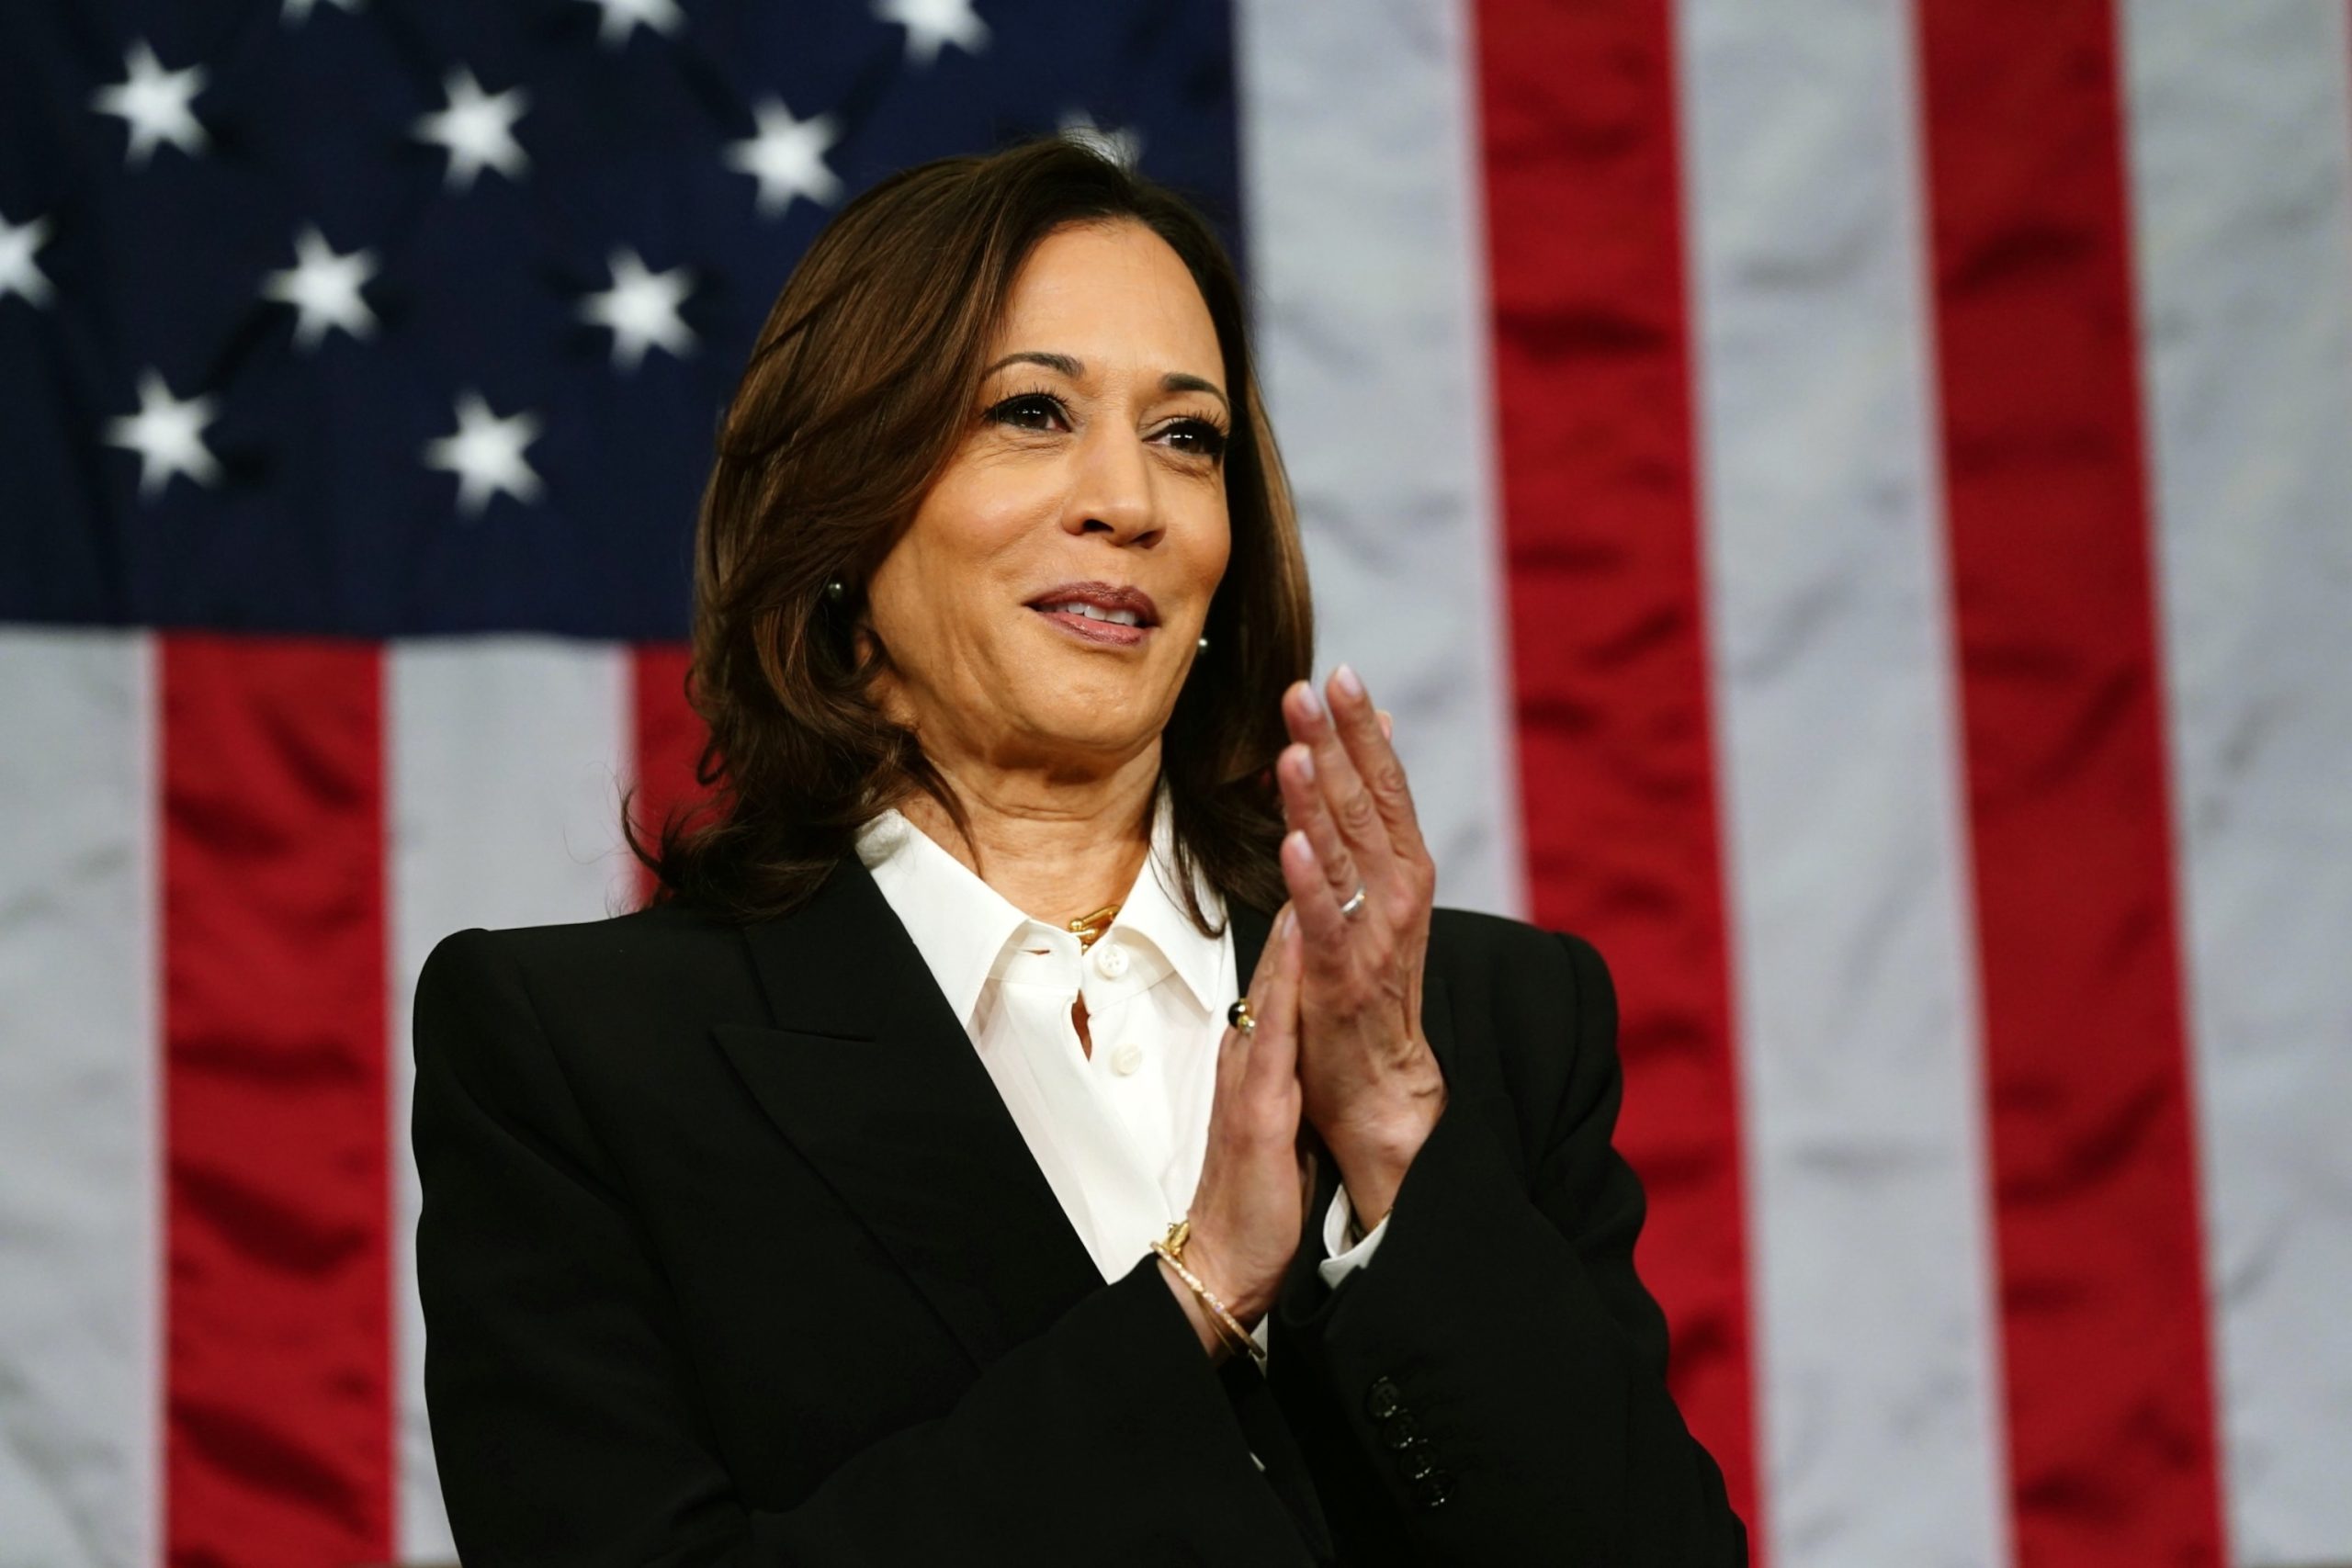 Harris does not confirm if Biden will debate Trump, but is prepared to serve if needed